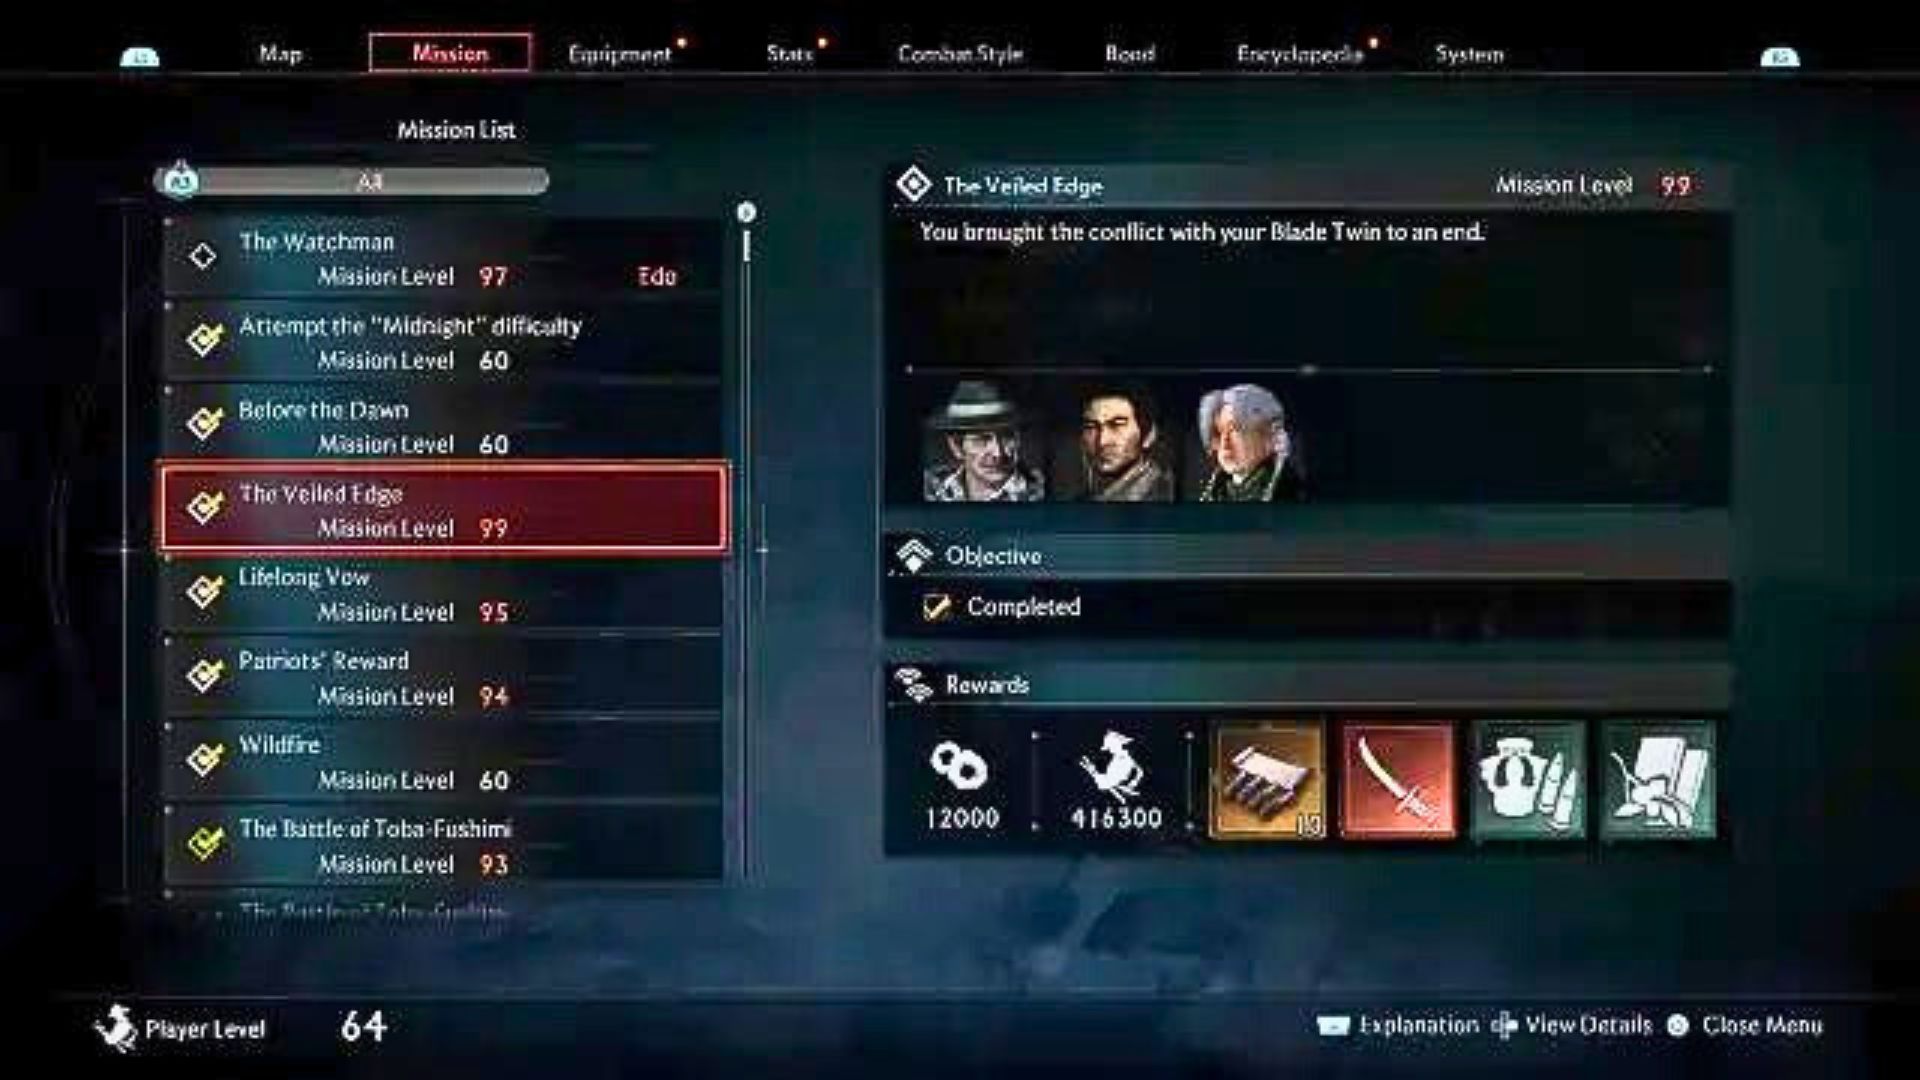 The Veiled Edge level 99 Midnight difficulty mission in the menu of Rise of the Ronin